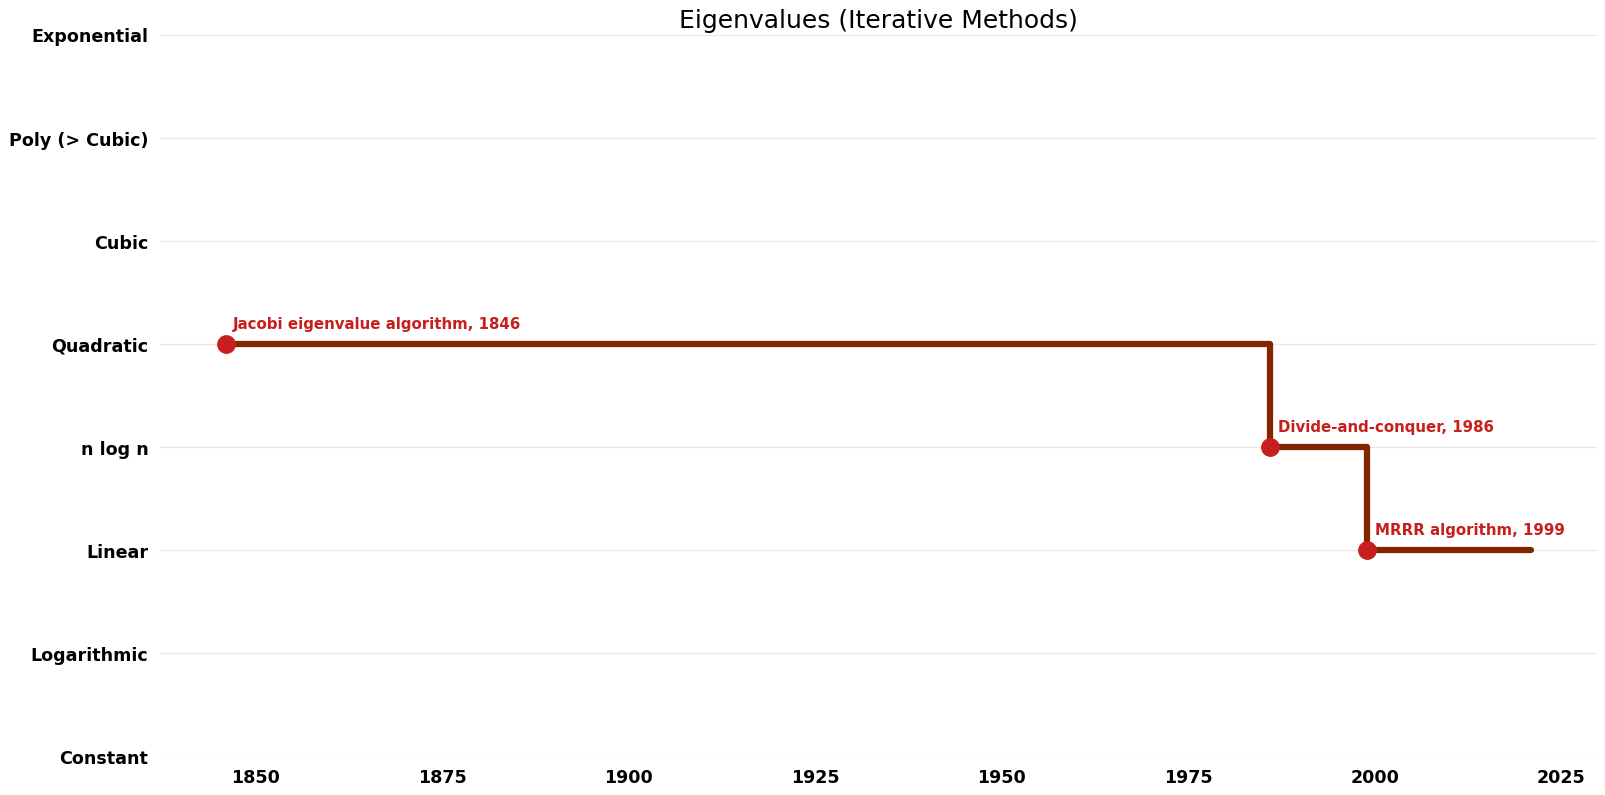 File:Eigenvalues (Iterative Methods) - Time.png